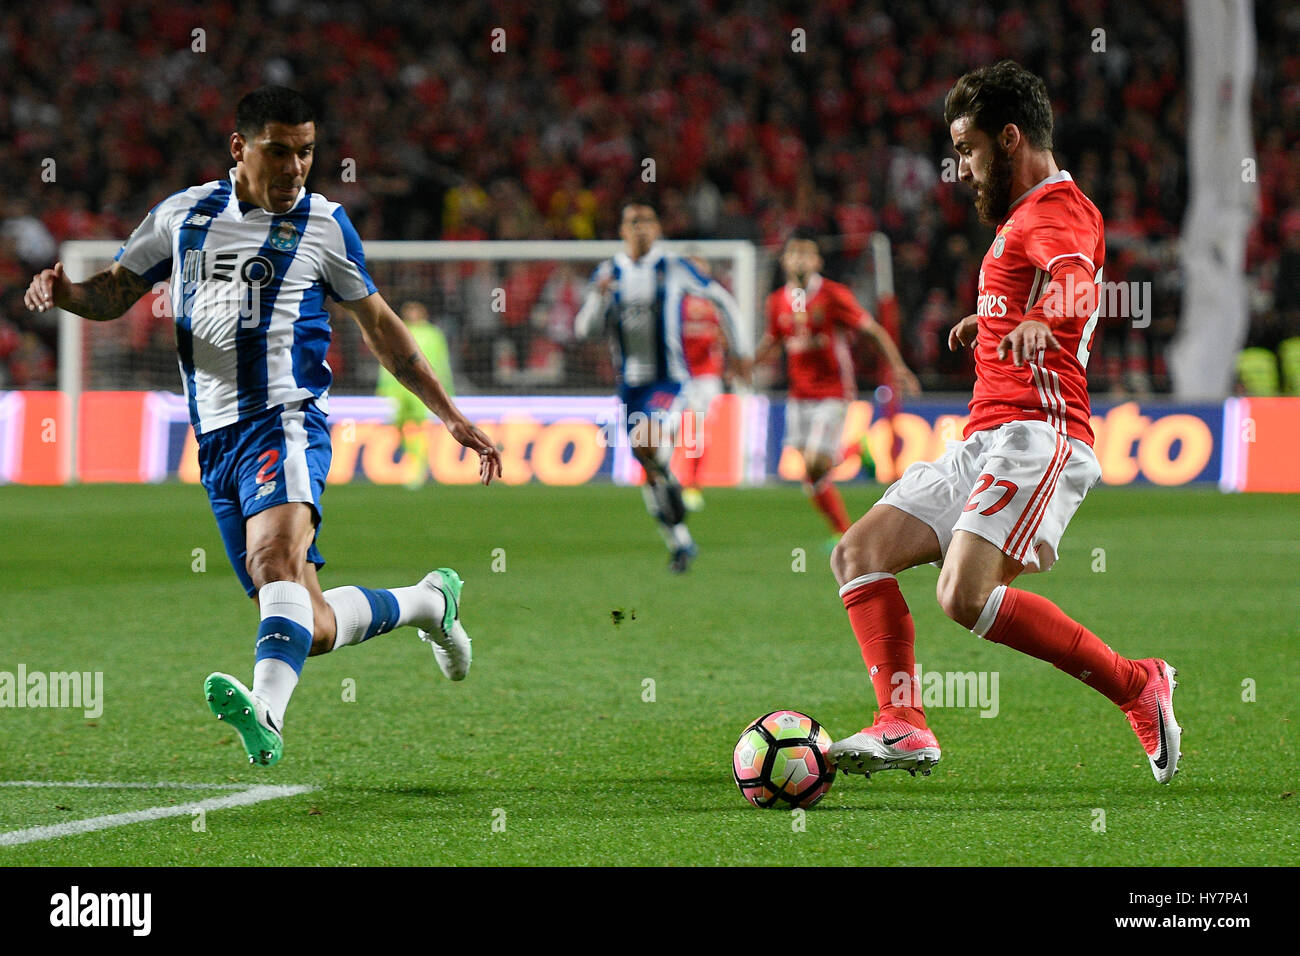 Portugal, Lisbon, April 1, 2017 -  FOOTBALL: PORTUGAL x FC PORTO - Maxi Pereira #2 PortoÕs defender from Uruguay (L) watches Rafa #27 BenficaÕs midfielder from Portugal controlling the ball during Portuguese First League football match between SL Benfica and FC Porto in Luz Stadium on April 1, 2017 in Lisbon, Portugal. Photo: Bruno de Carvalho / Alamy Stock Photo